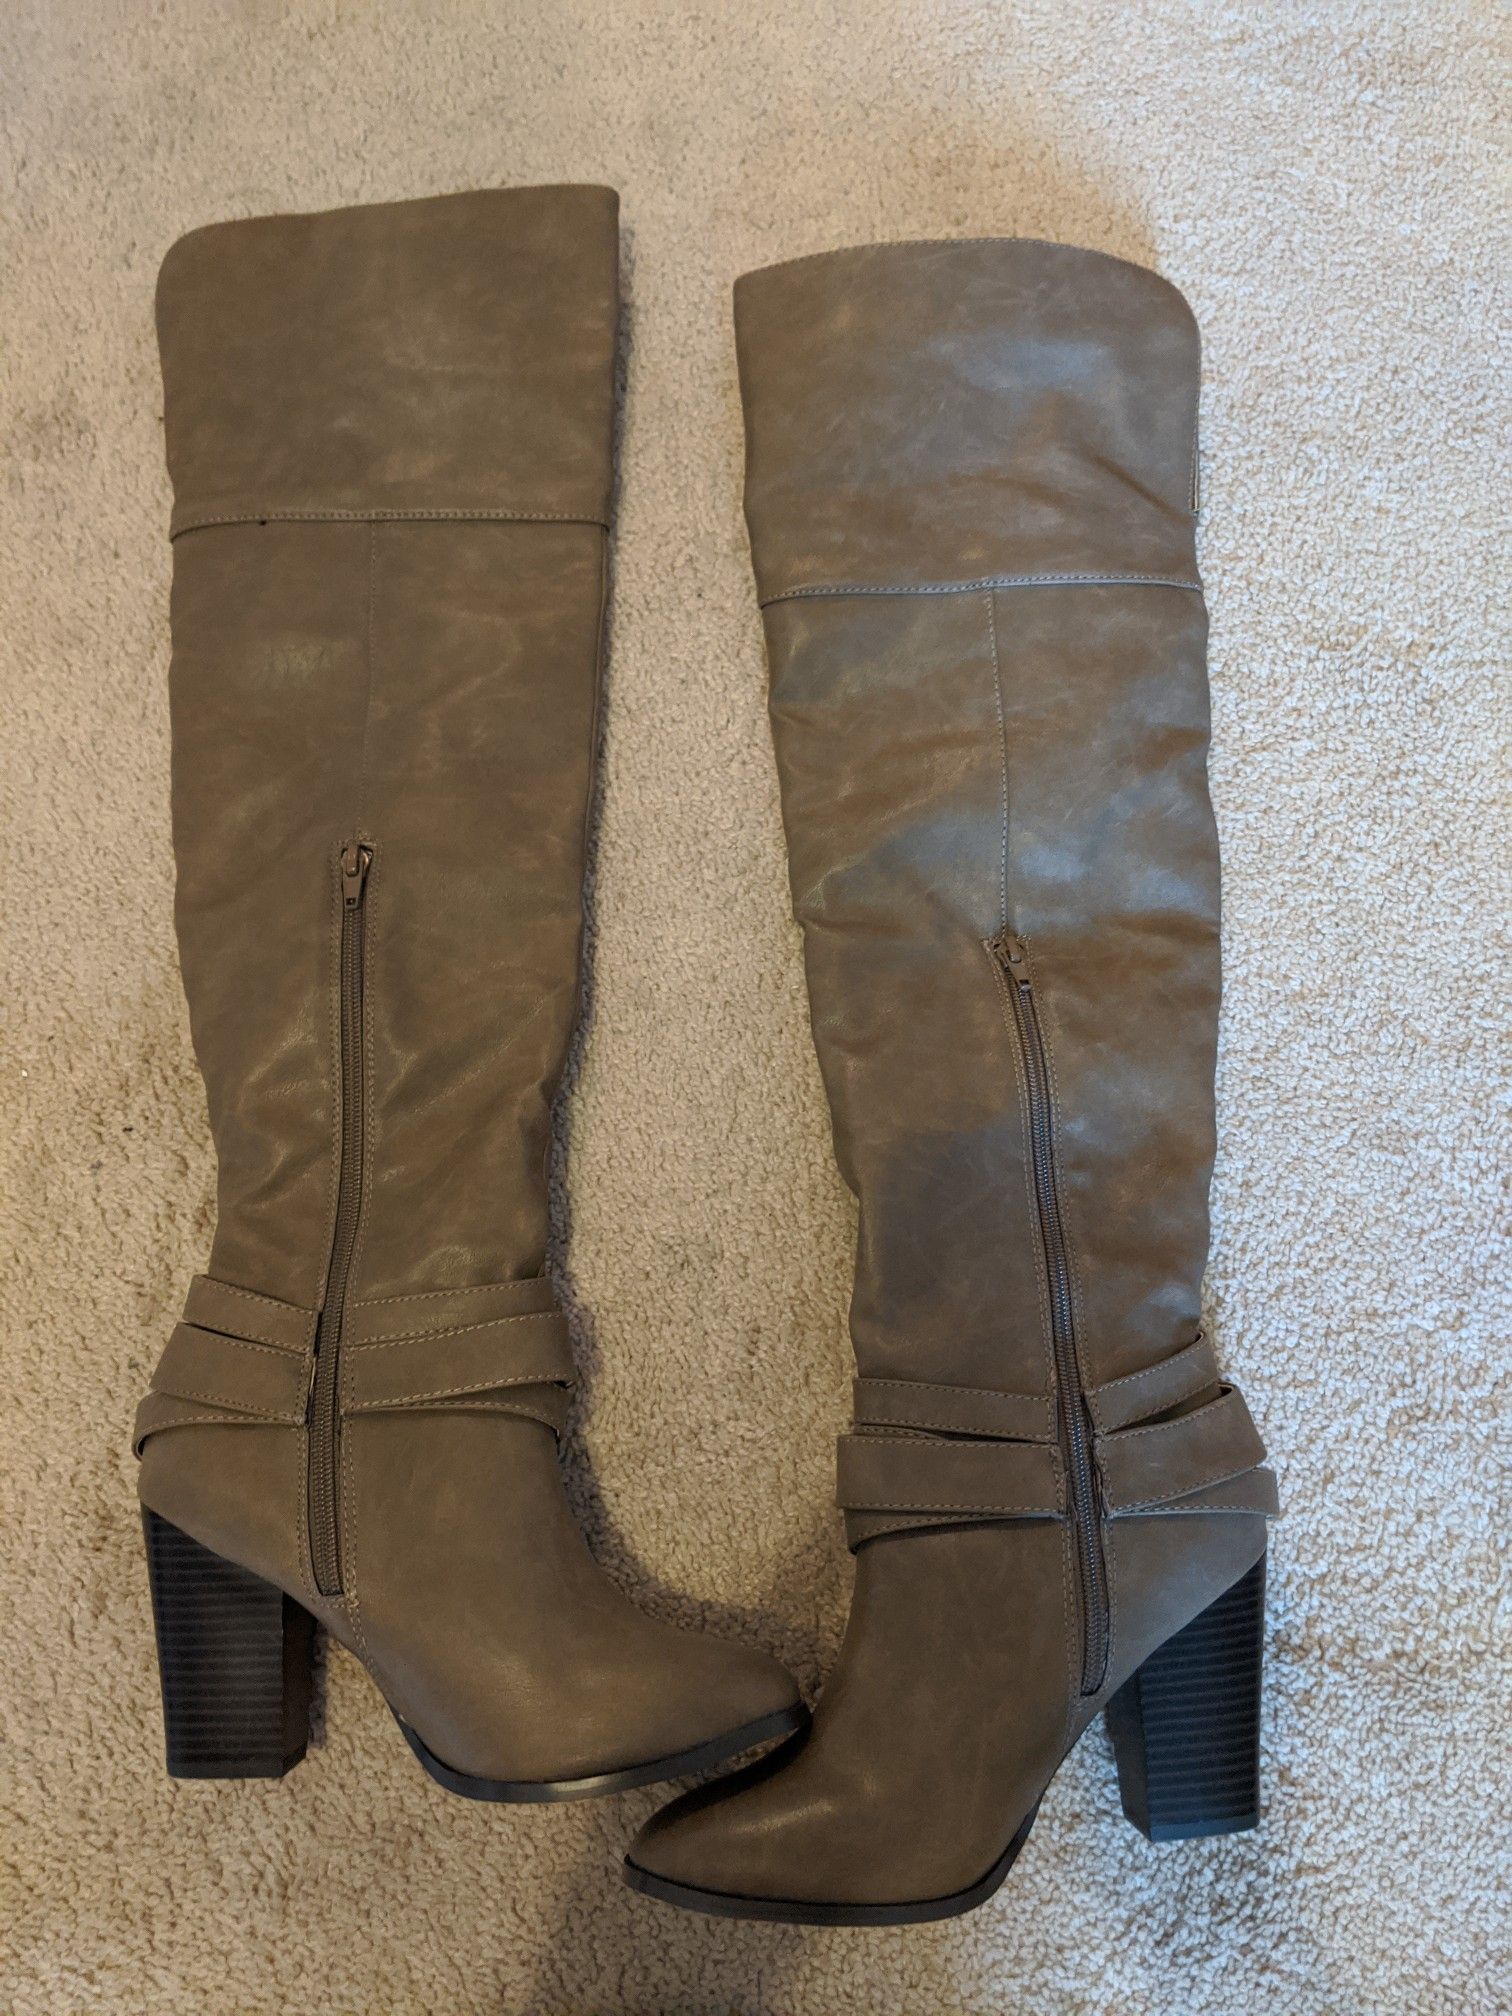 Tan Over the knee boots size 7